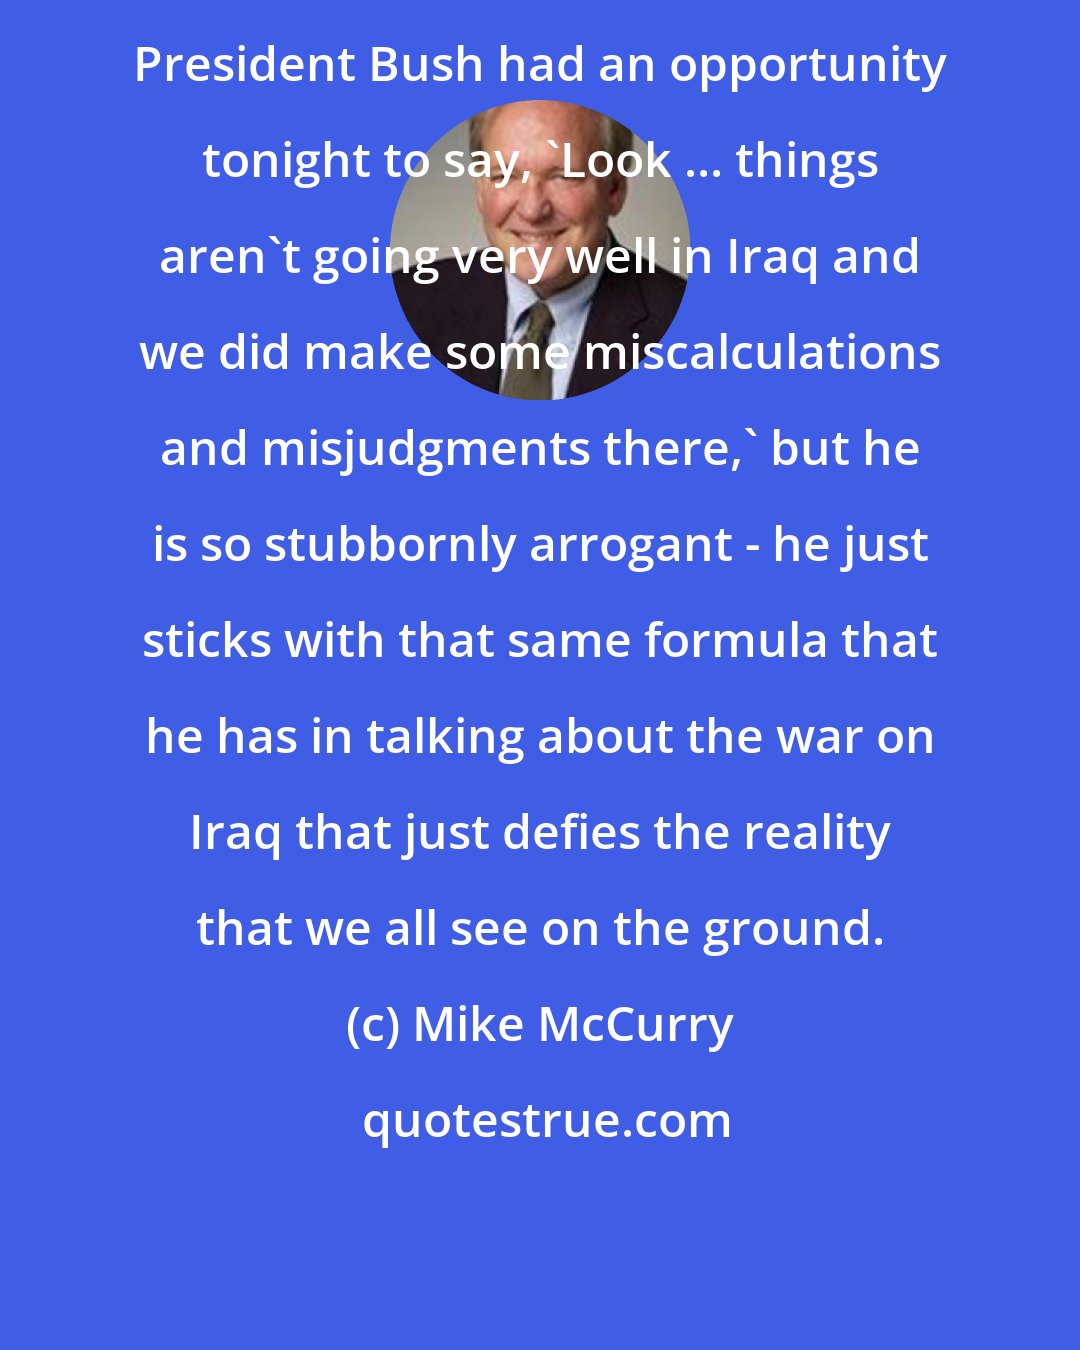 Mike McCurry: President Bush had an opportunity tonight to say, 'Look ... things aren't going very well in Iraq and we did make some miscalculations and misjudgments there,' but he is so stubbornly arrogant - he just sticks with that same formula that he has in talking about the war on Iraq that just defies the reality that we all see on the ground.